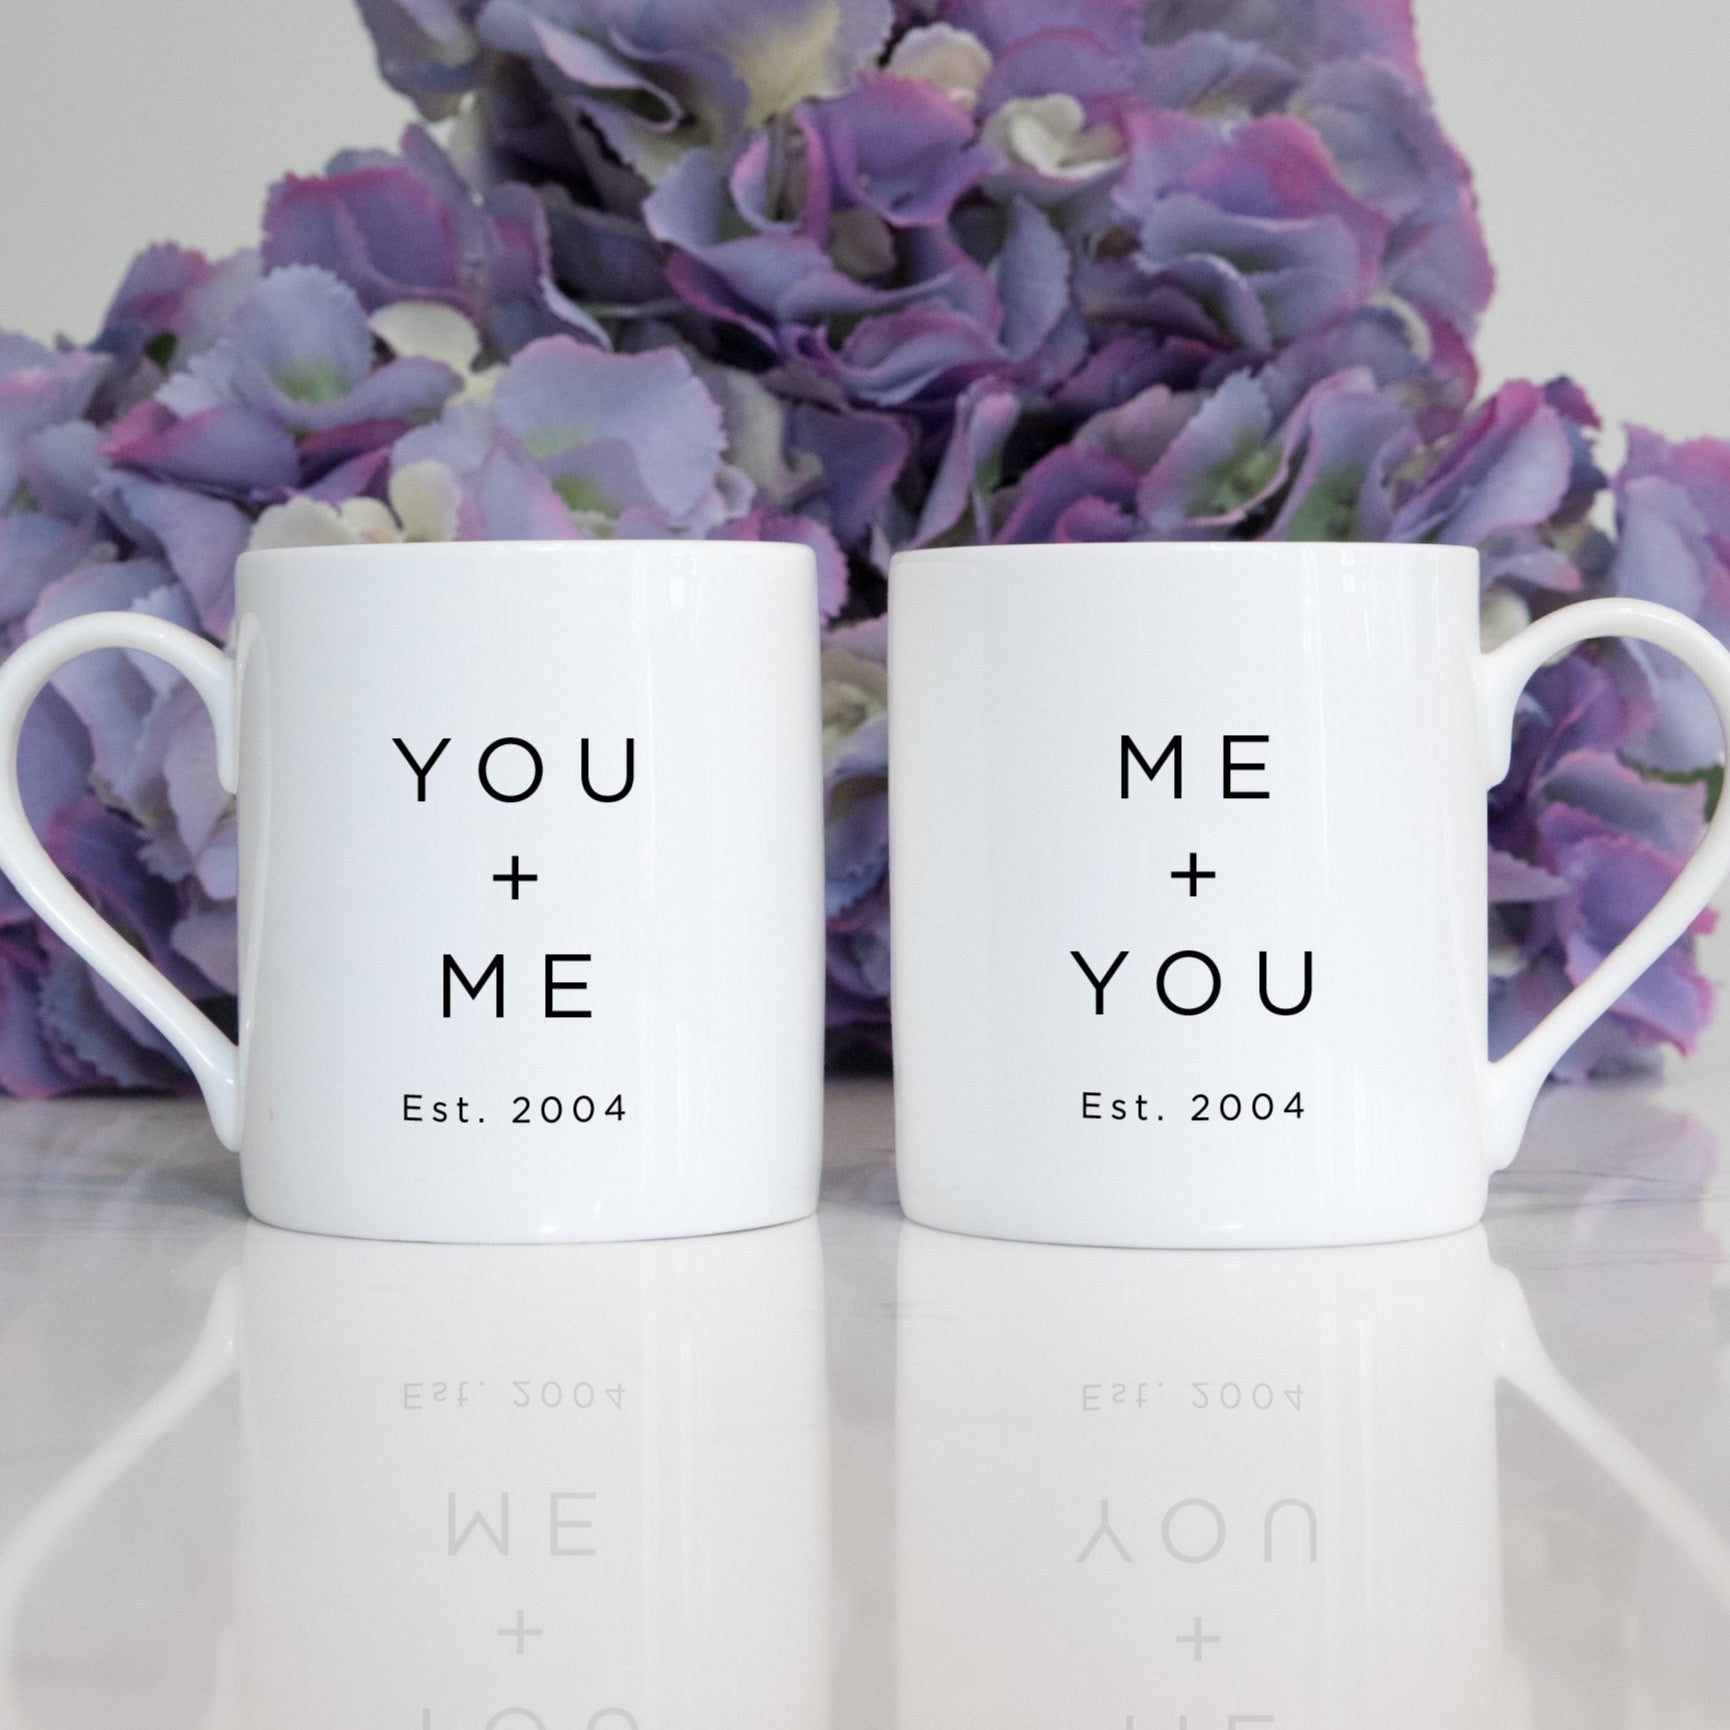 You and me couple's mug set.All images and designs © Slice of Pie Designs